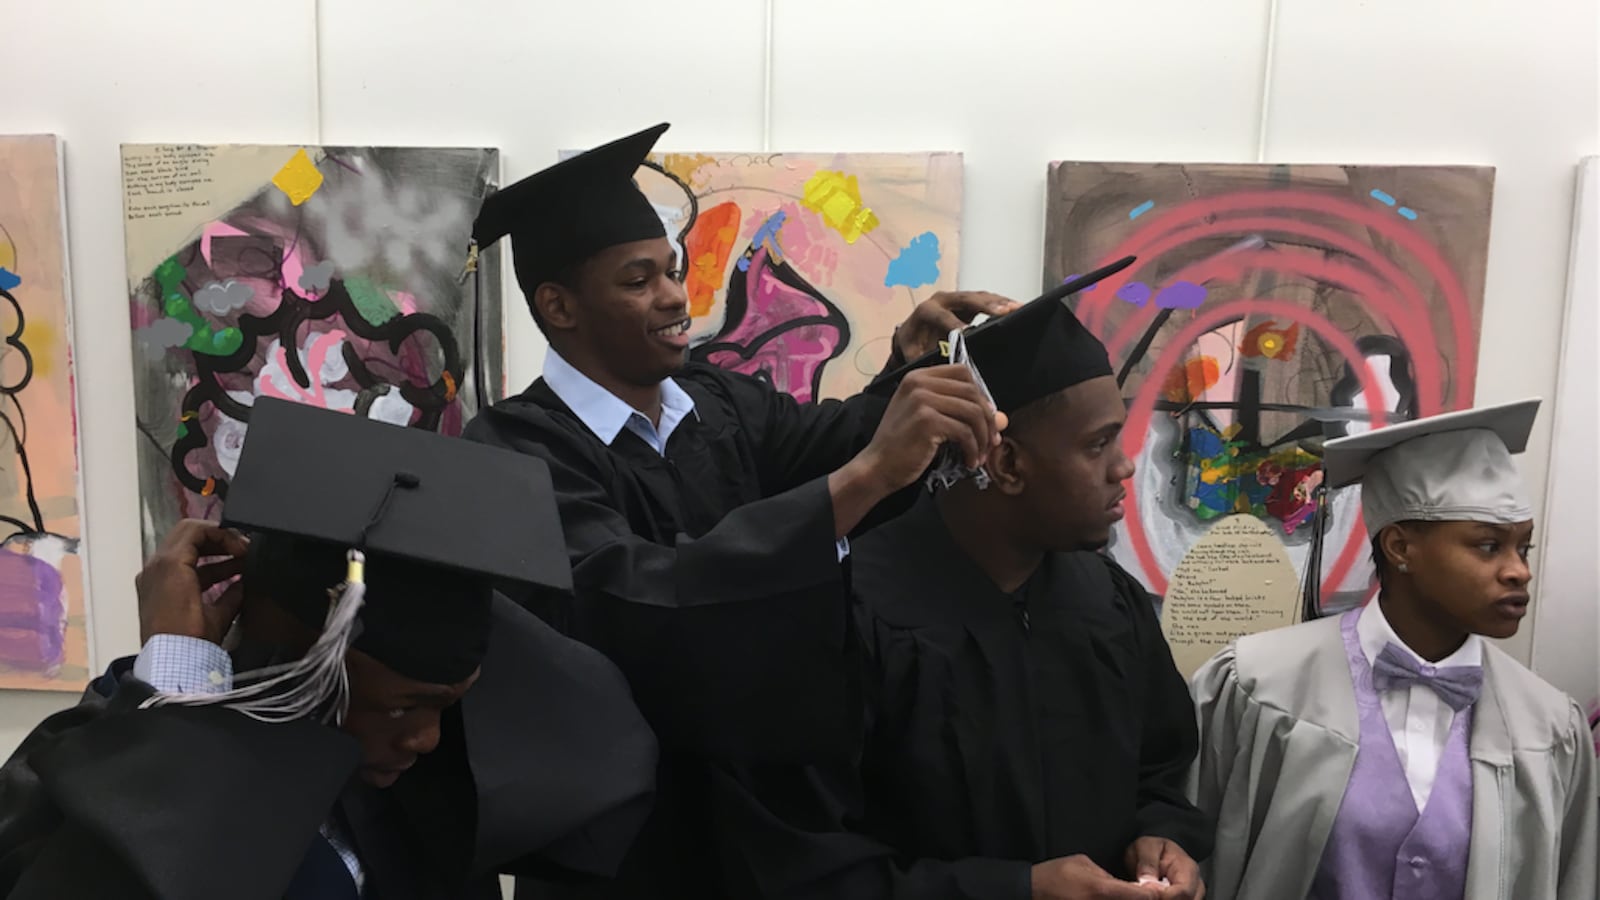 Jahrell Thomas, center, helps a classmate with his cap.